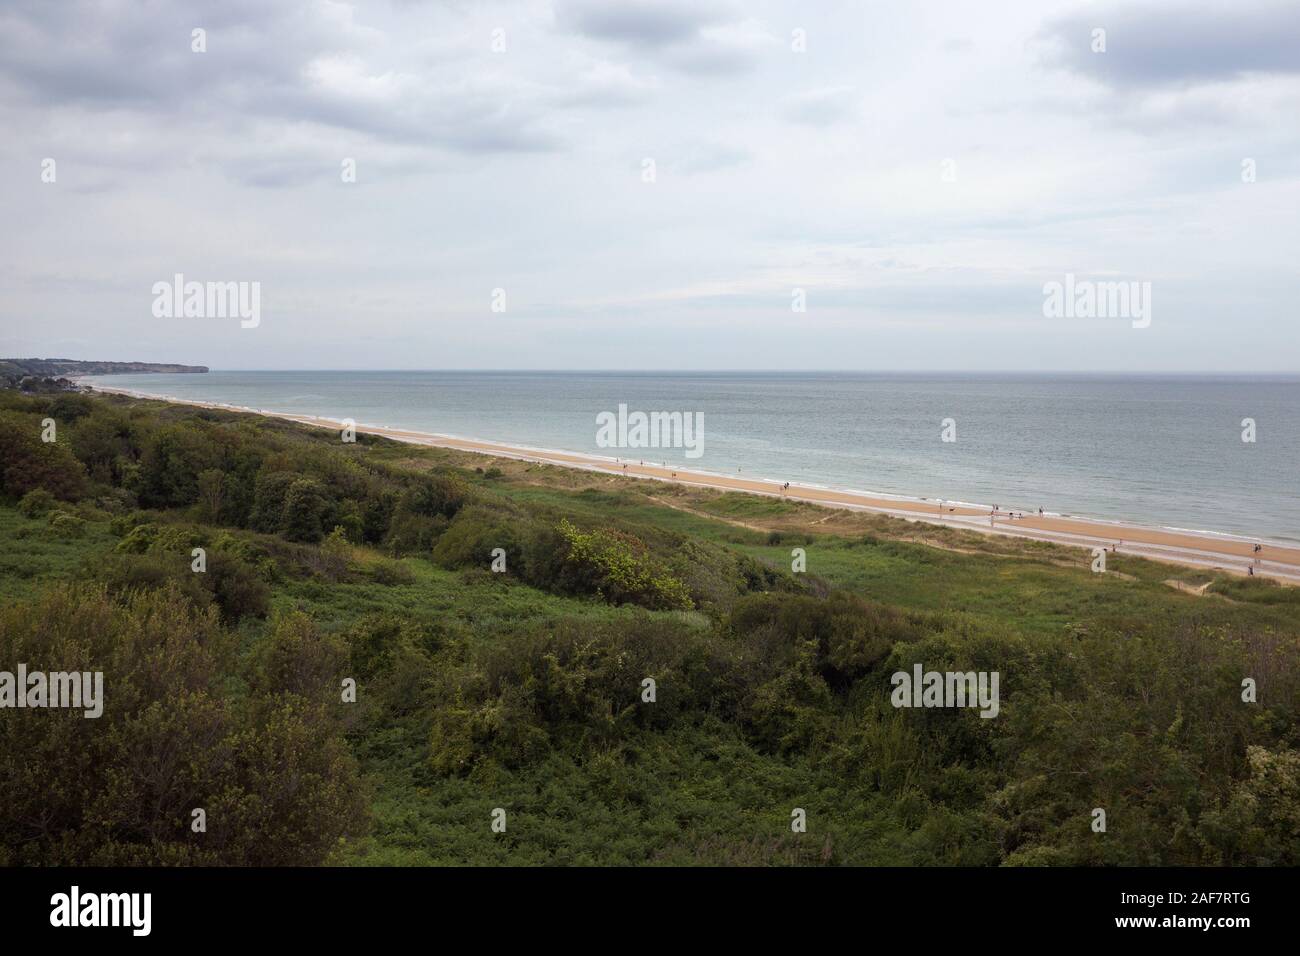 View over Omaha Beach from Widerstandsnest 62 (WN 62), Colleville-sur-Mer, Normandy, France Stock Photo